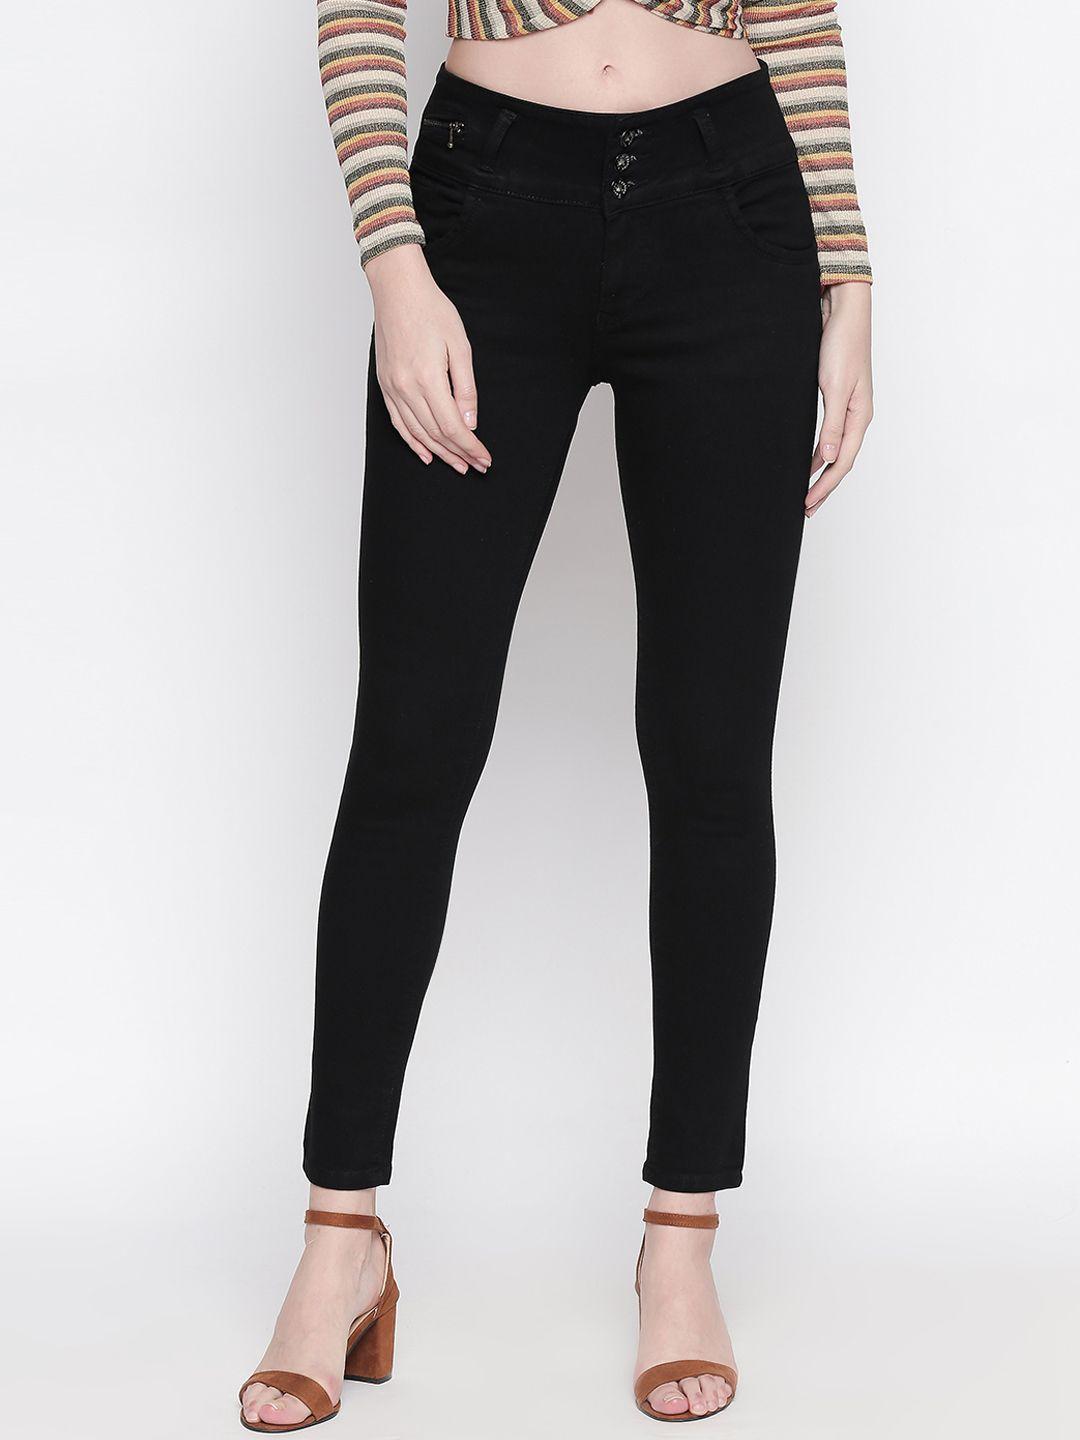 high-star-women-black-slim-fit-high-rise-clean-look-stretchable-jeans